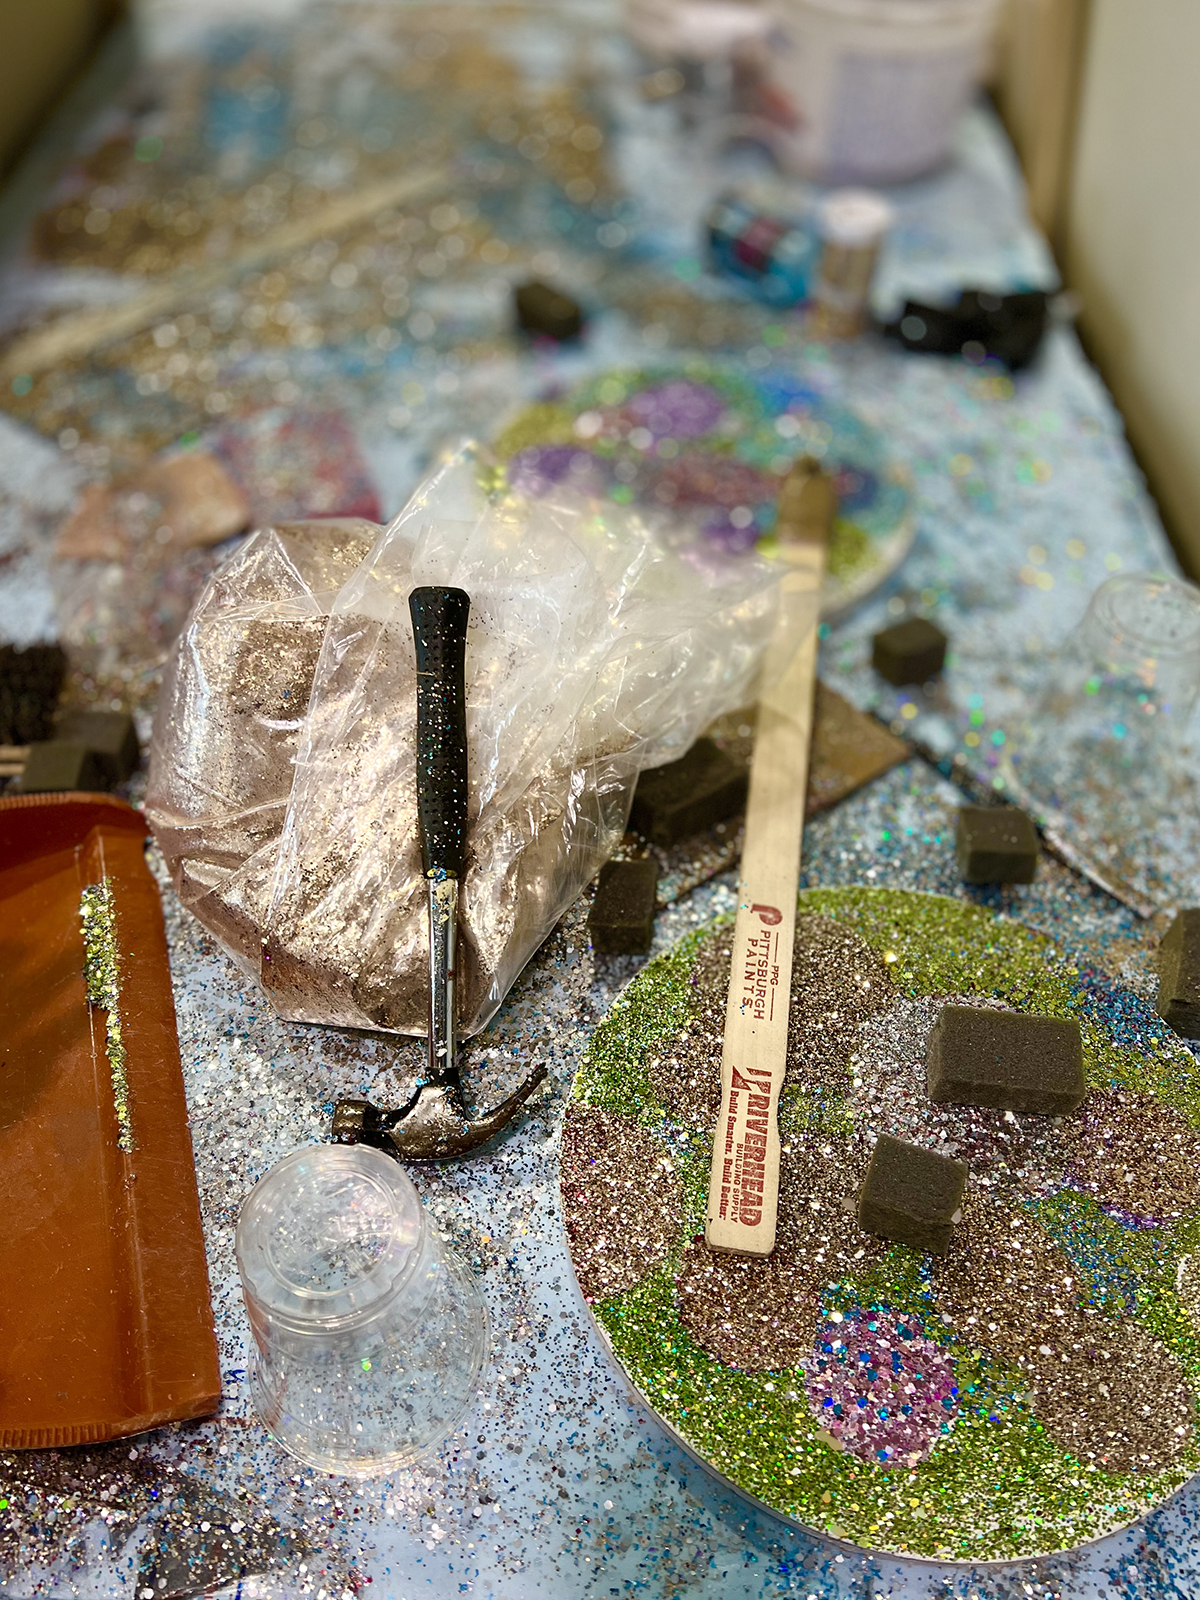 A paint brush and scalpel on a table covered in glitter